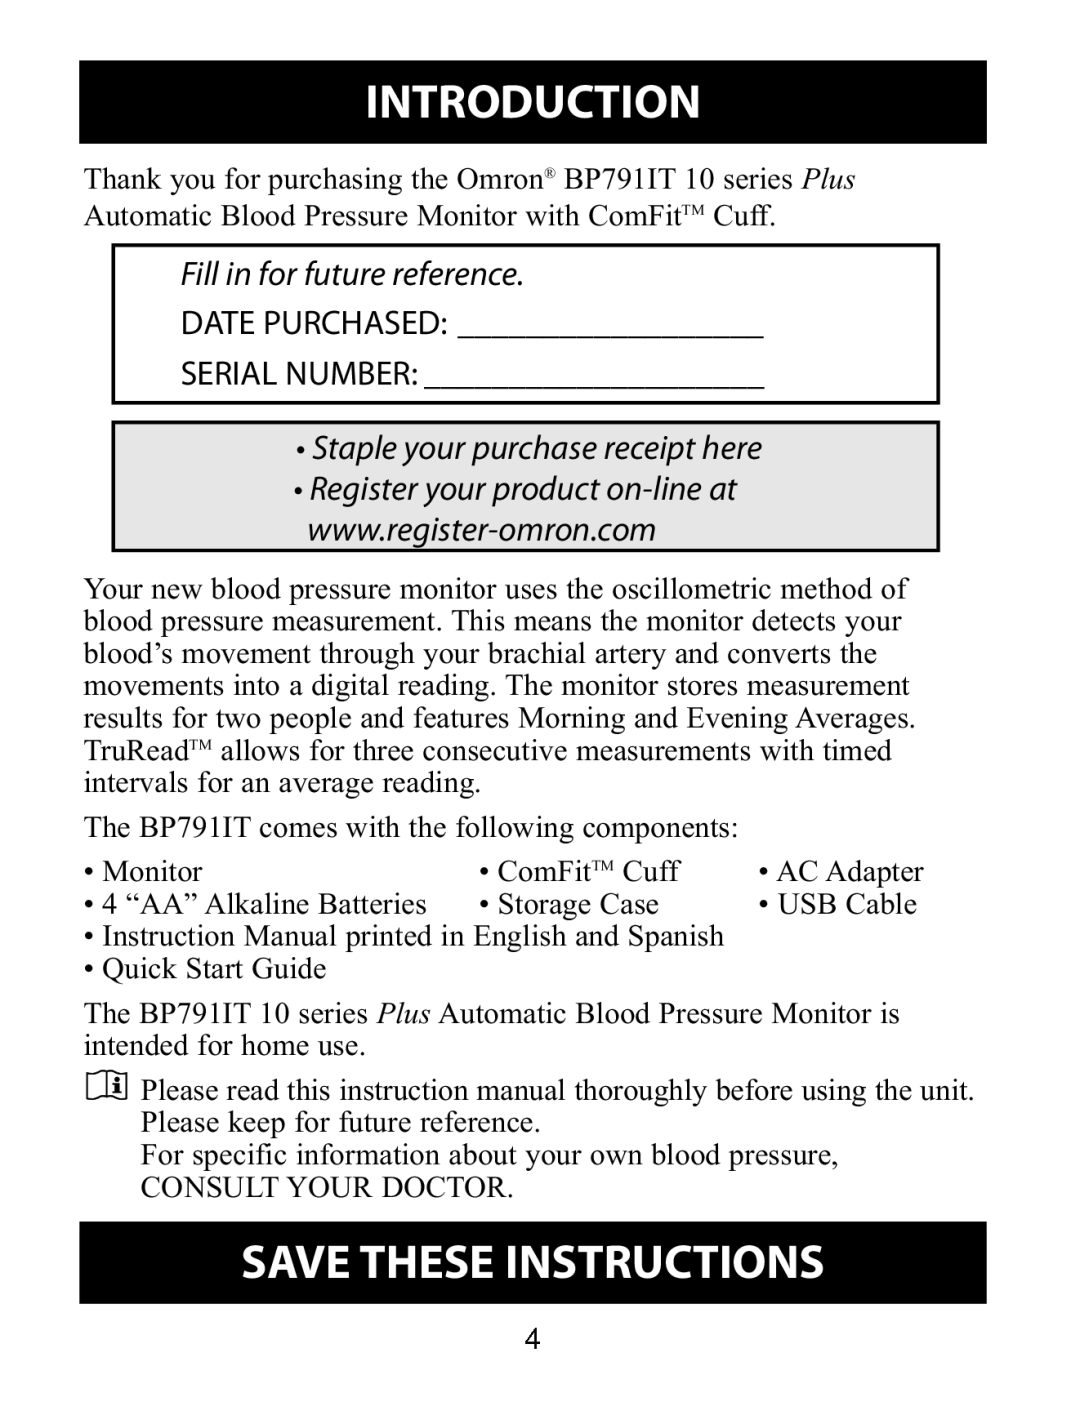 Omron Healthcare BP791IT Introduction, Save These Instructions, Date Purchased Serial Number, Fill in for future reference 